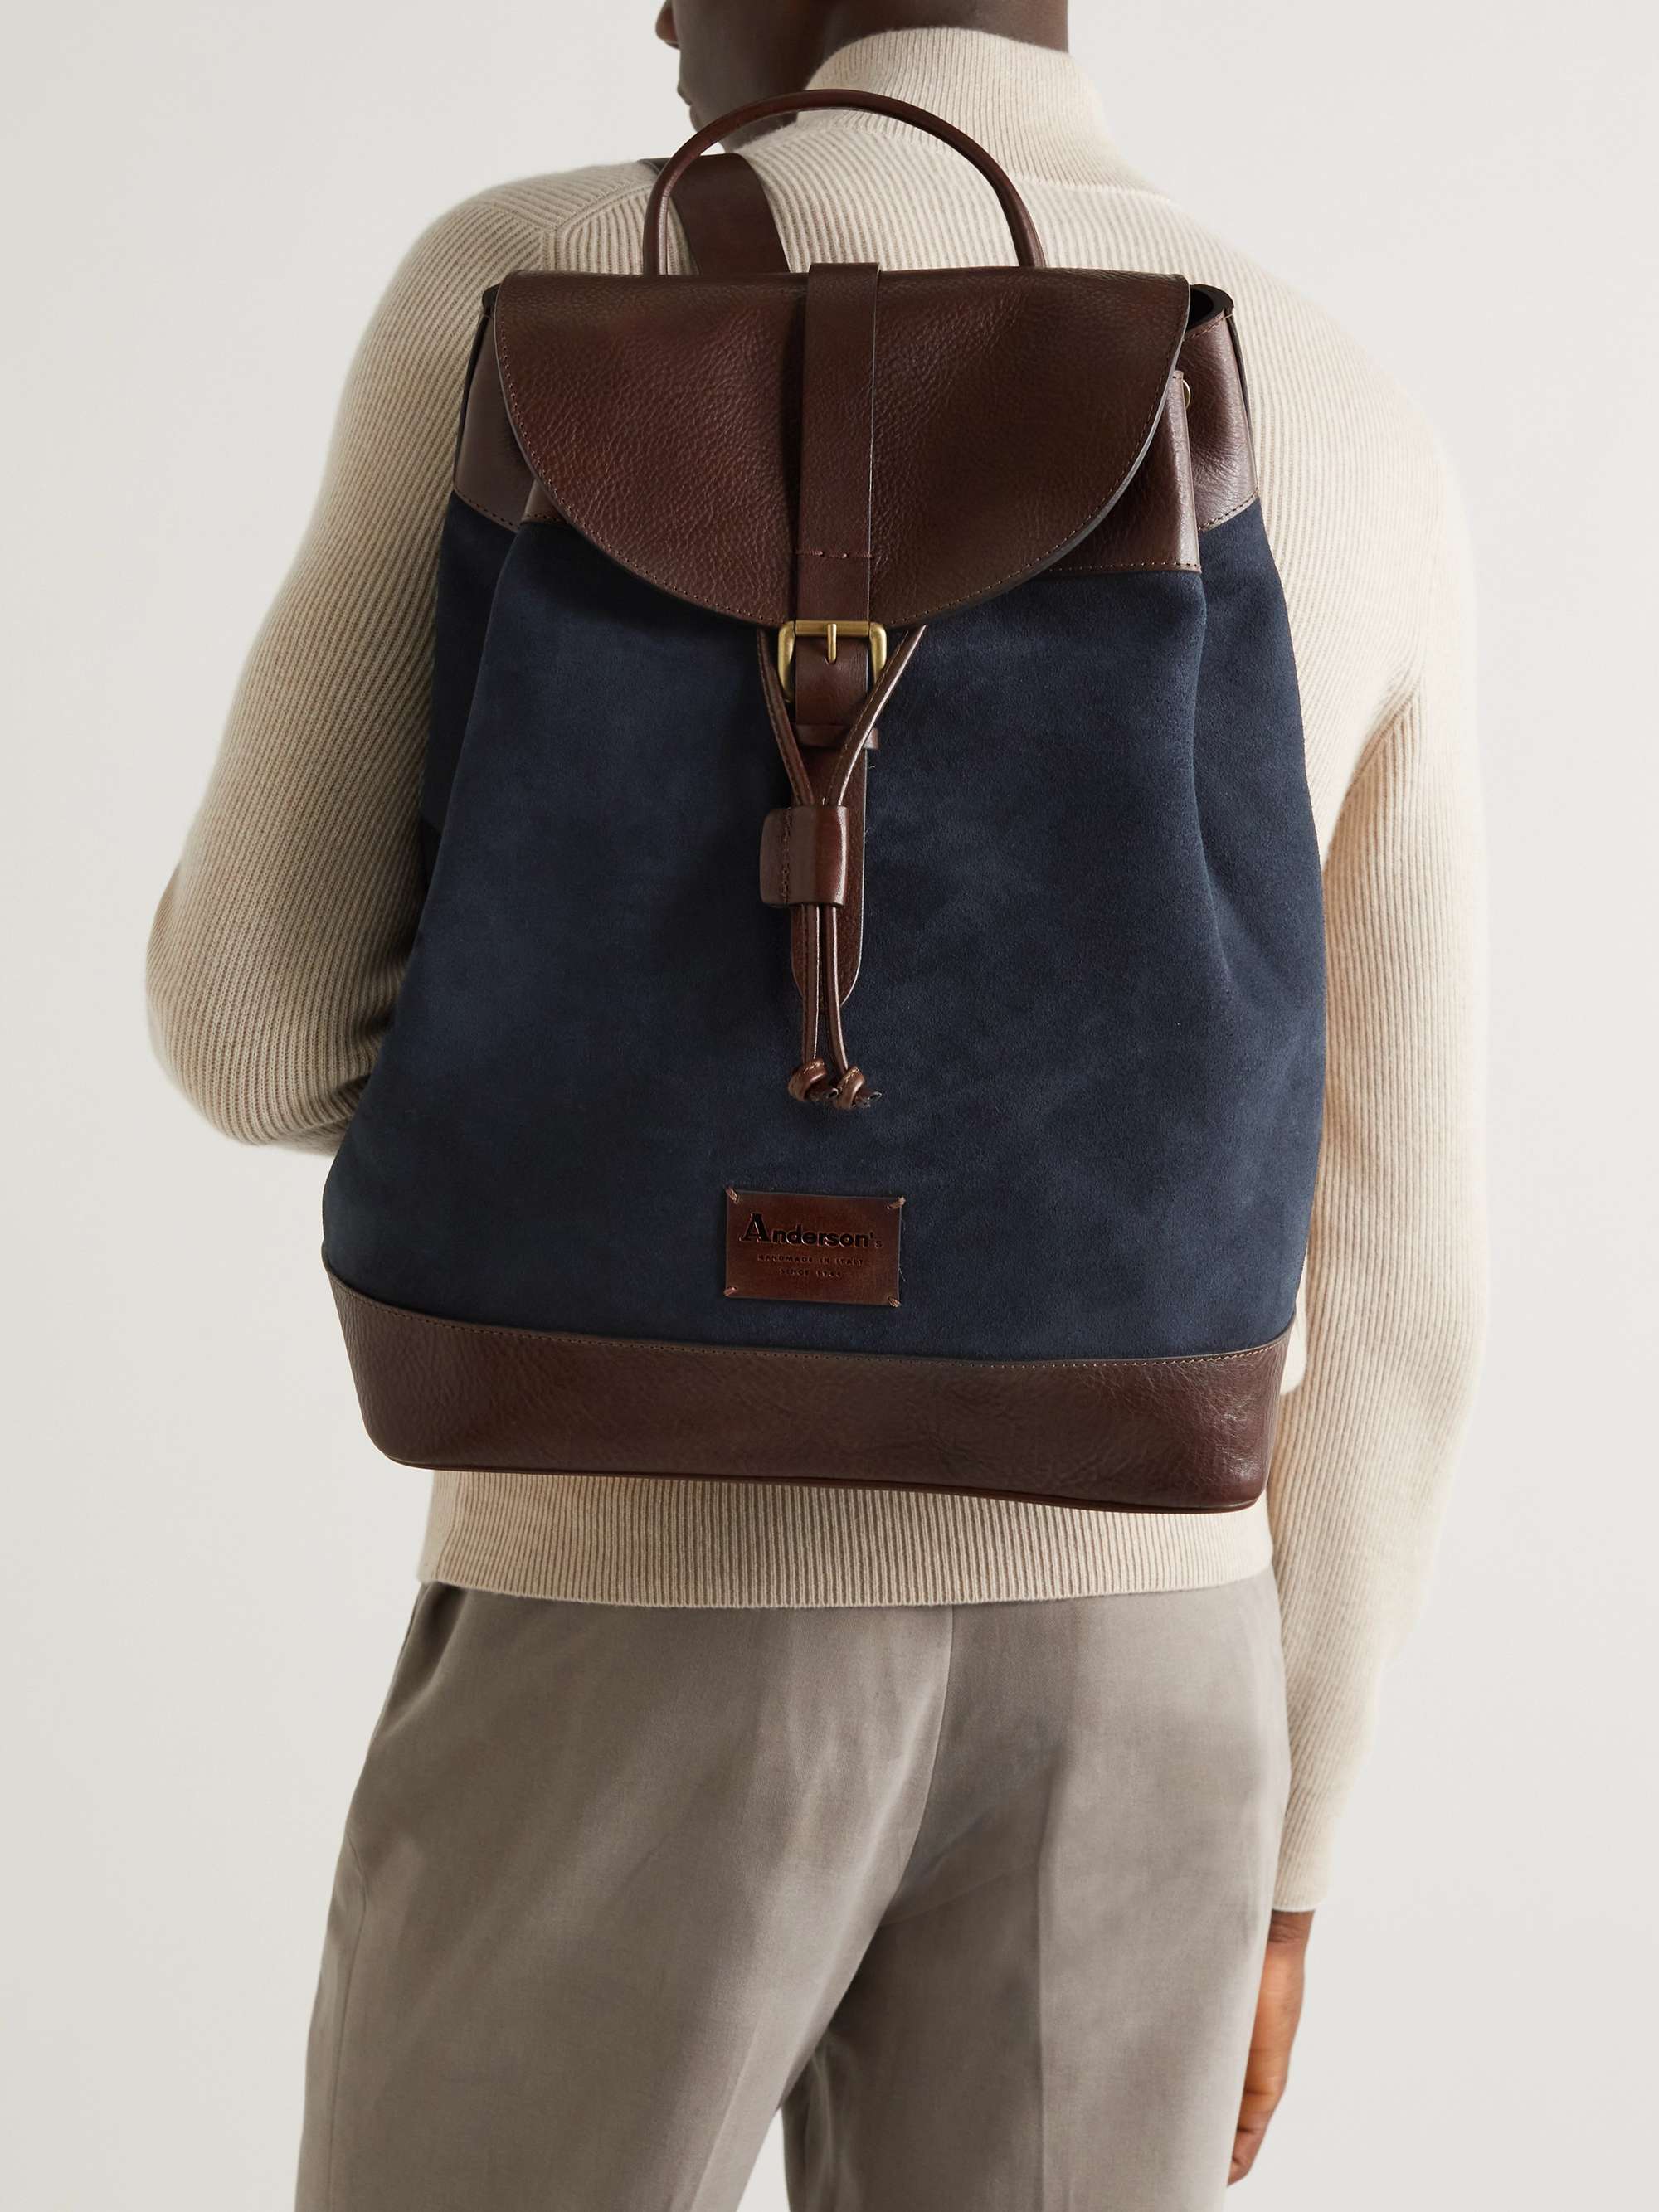 ANDERSON'S Textured Leather-Trimmed Suede Backpack